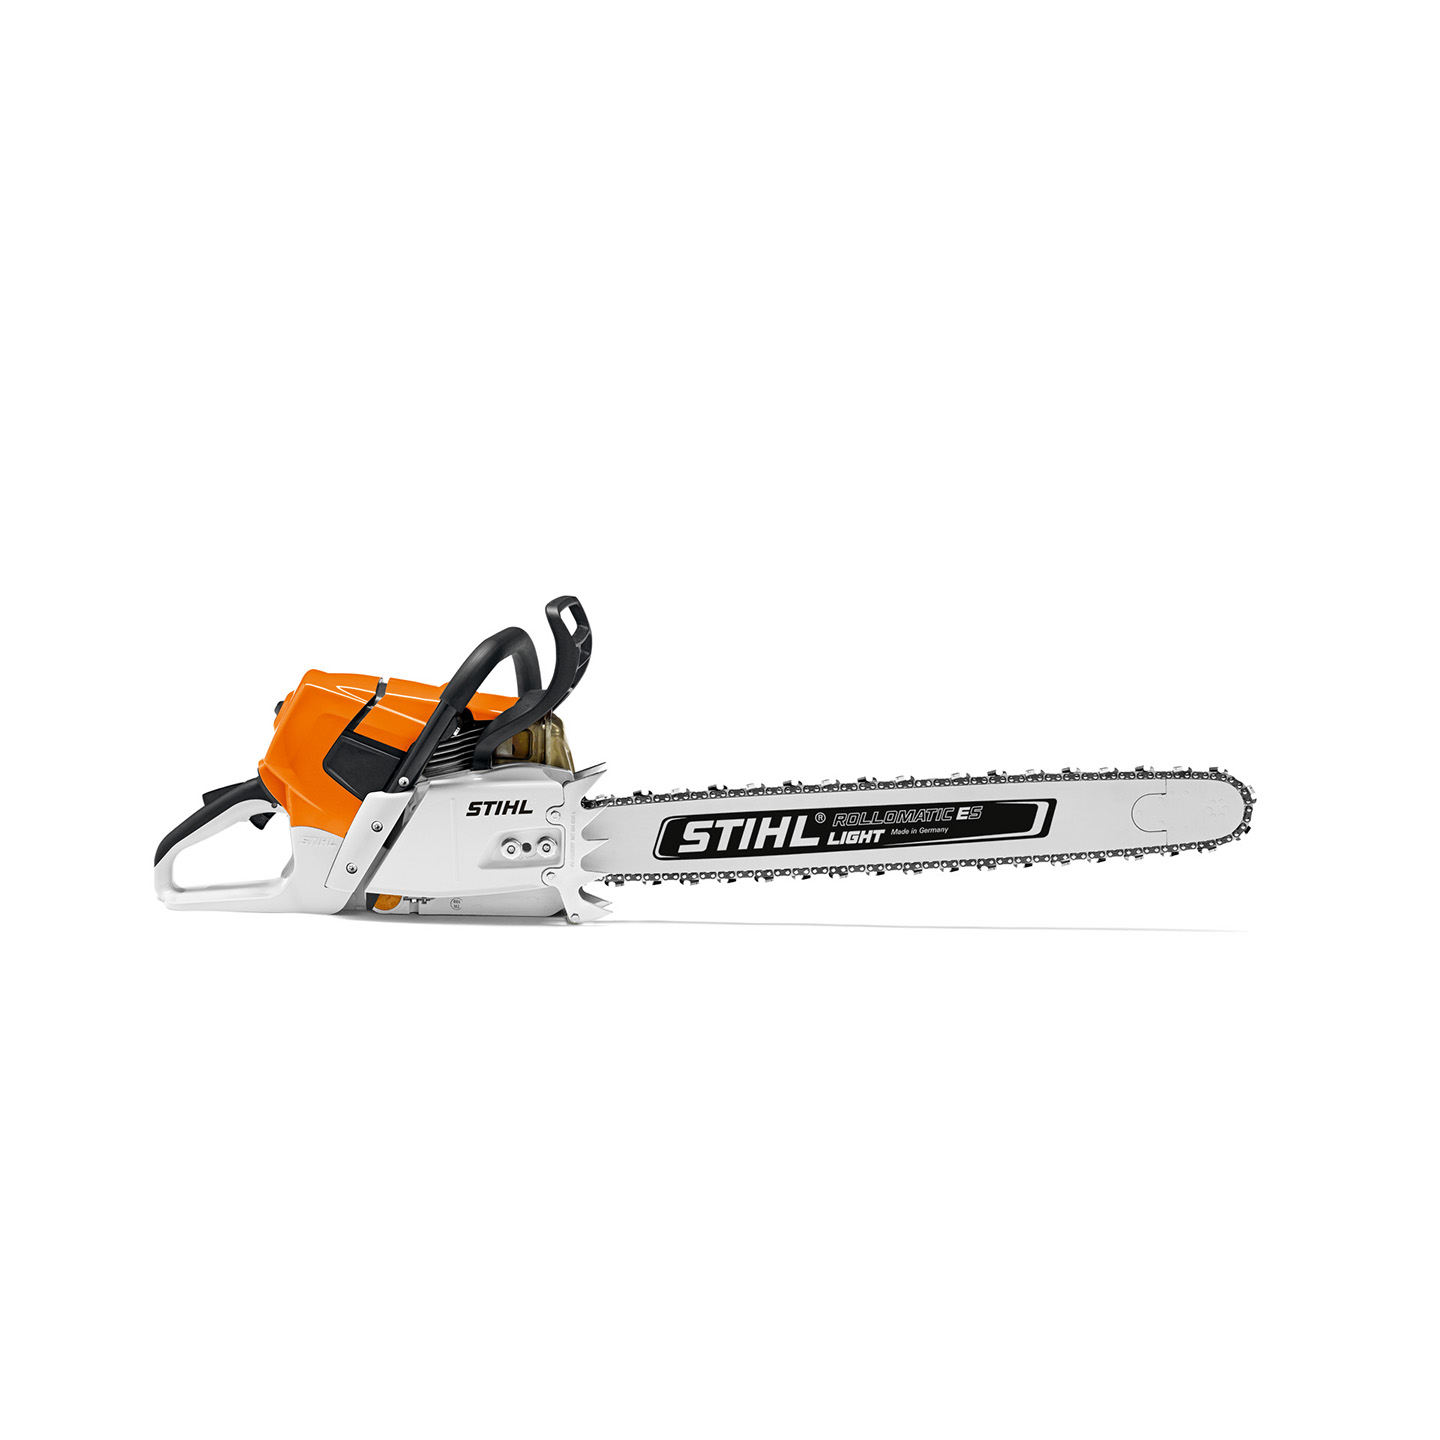 MS 661 C-M Chainsaw,90cm/36",36RS